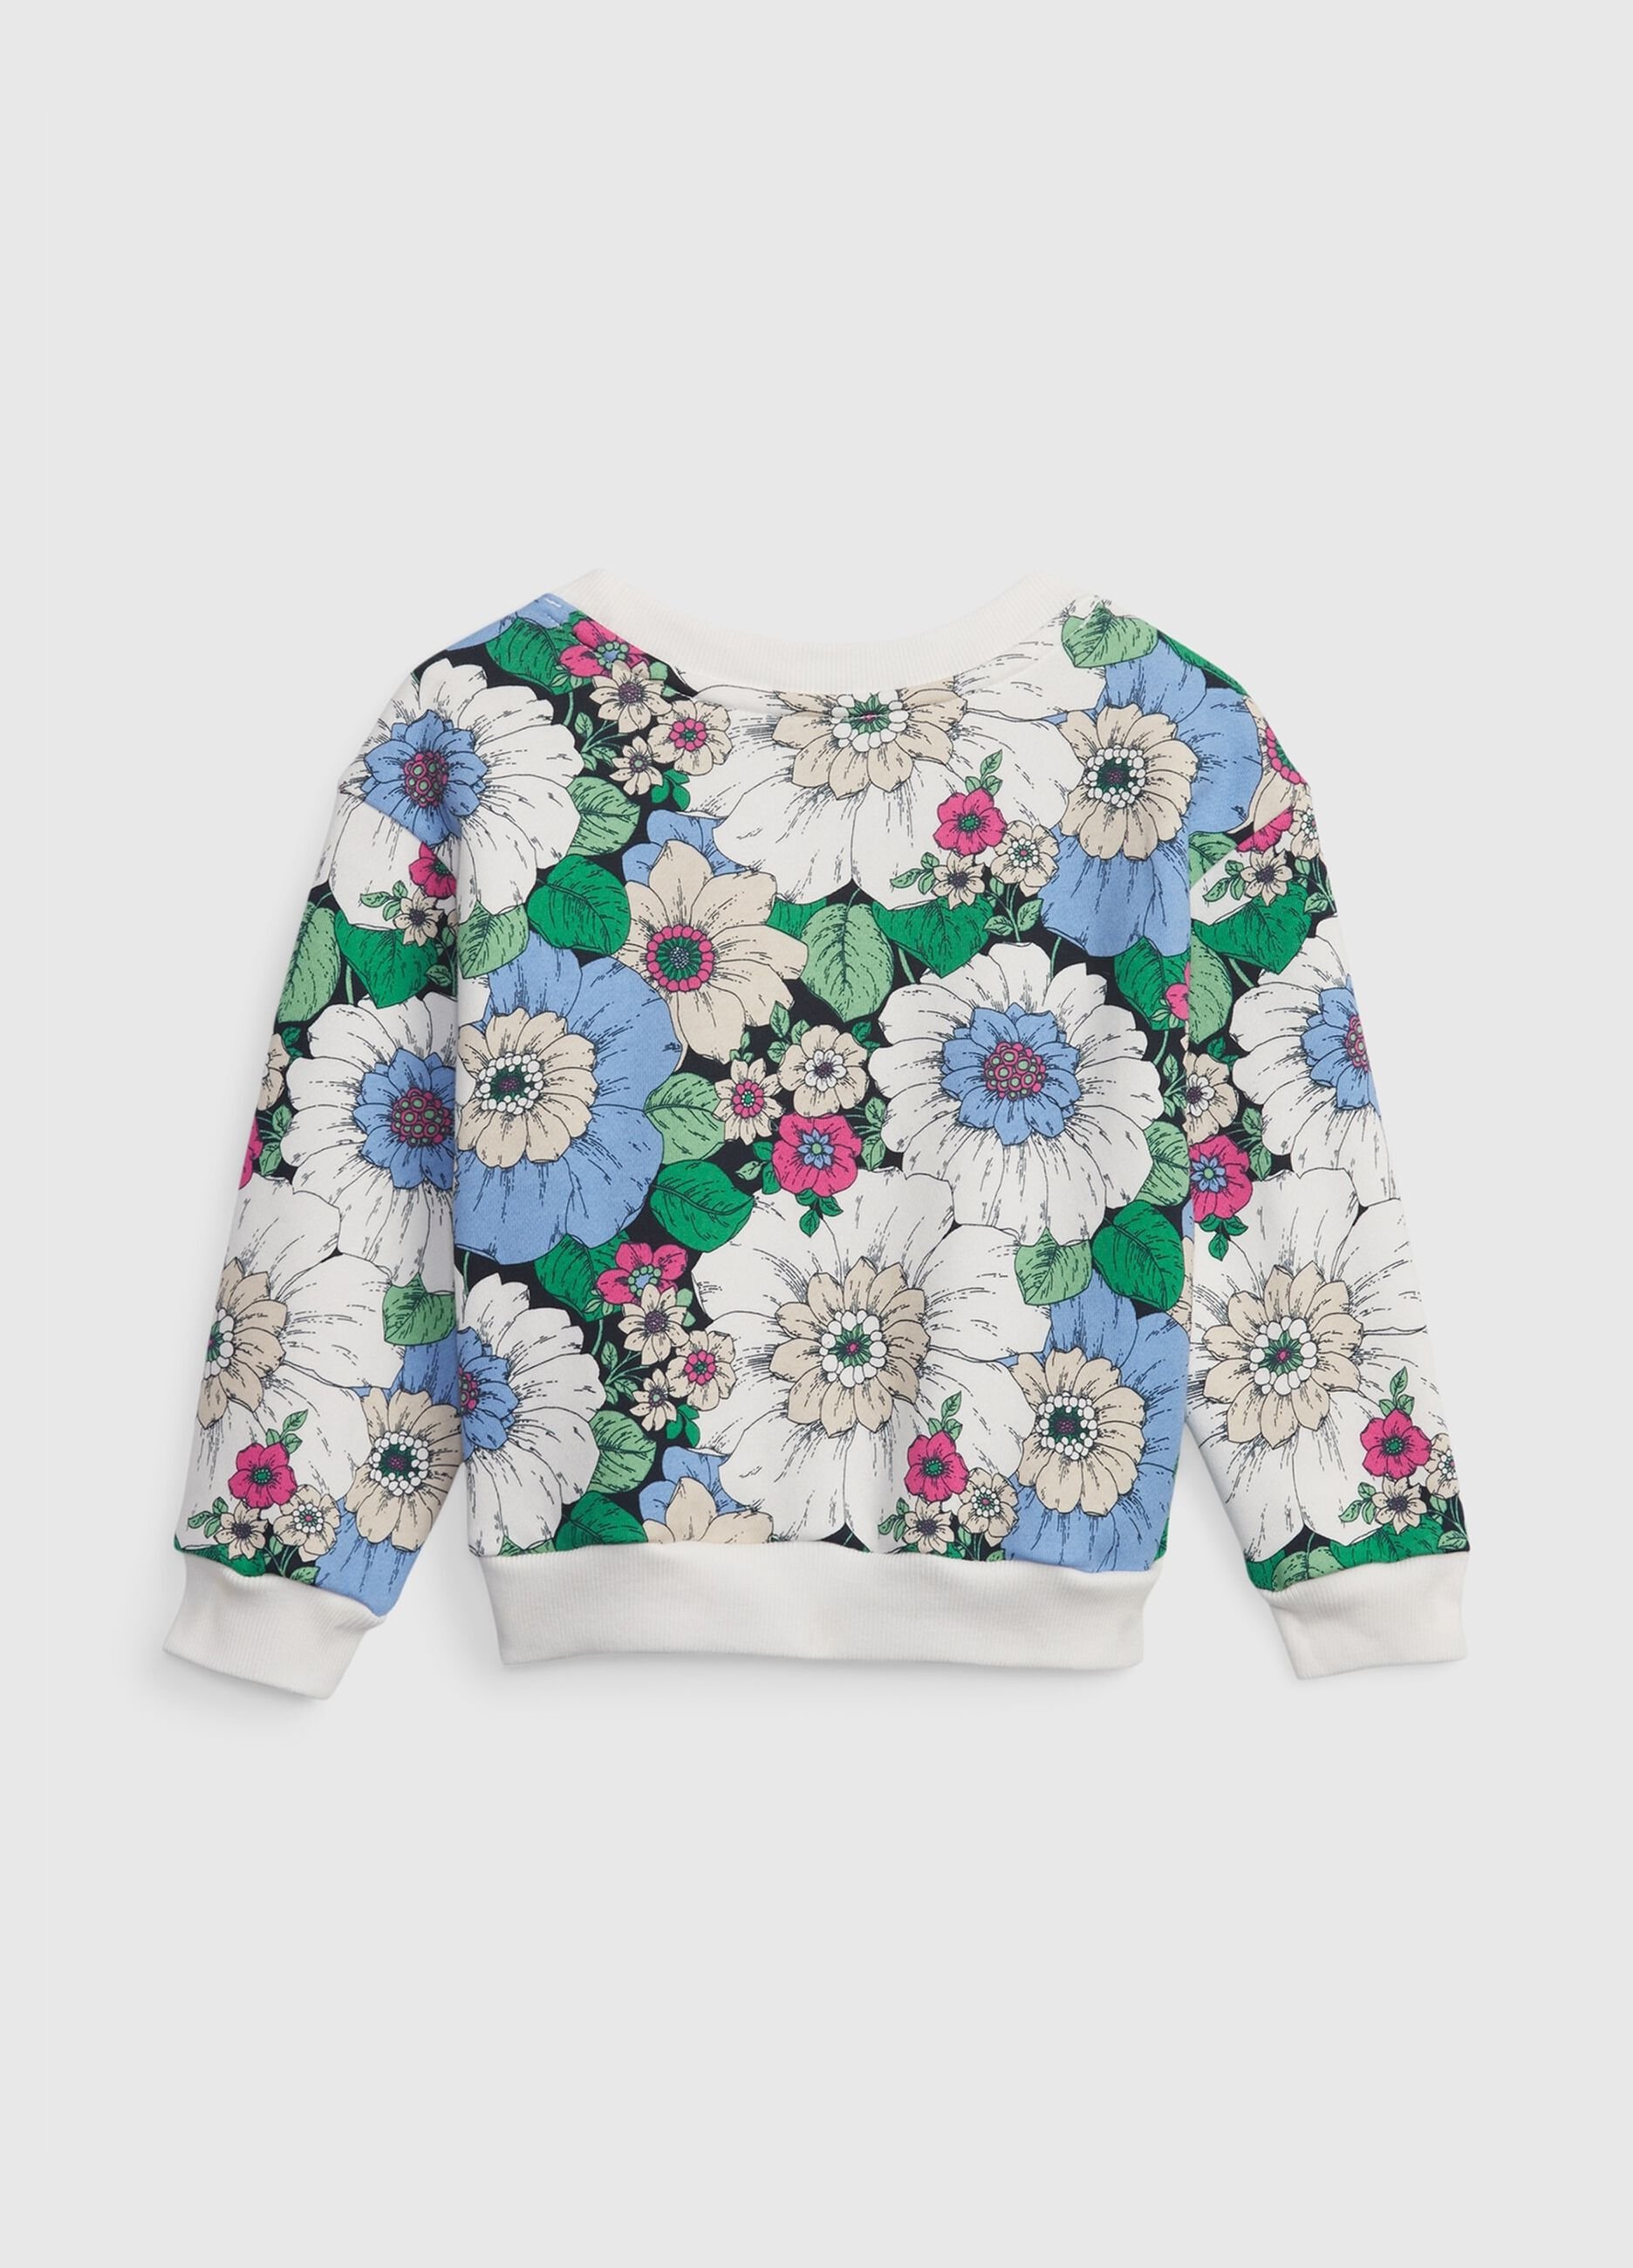 Sweatshirt with round neck and floral pattern